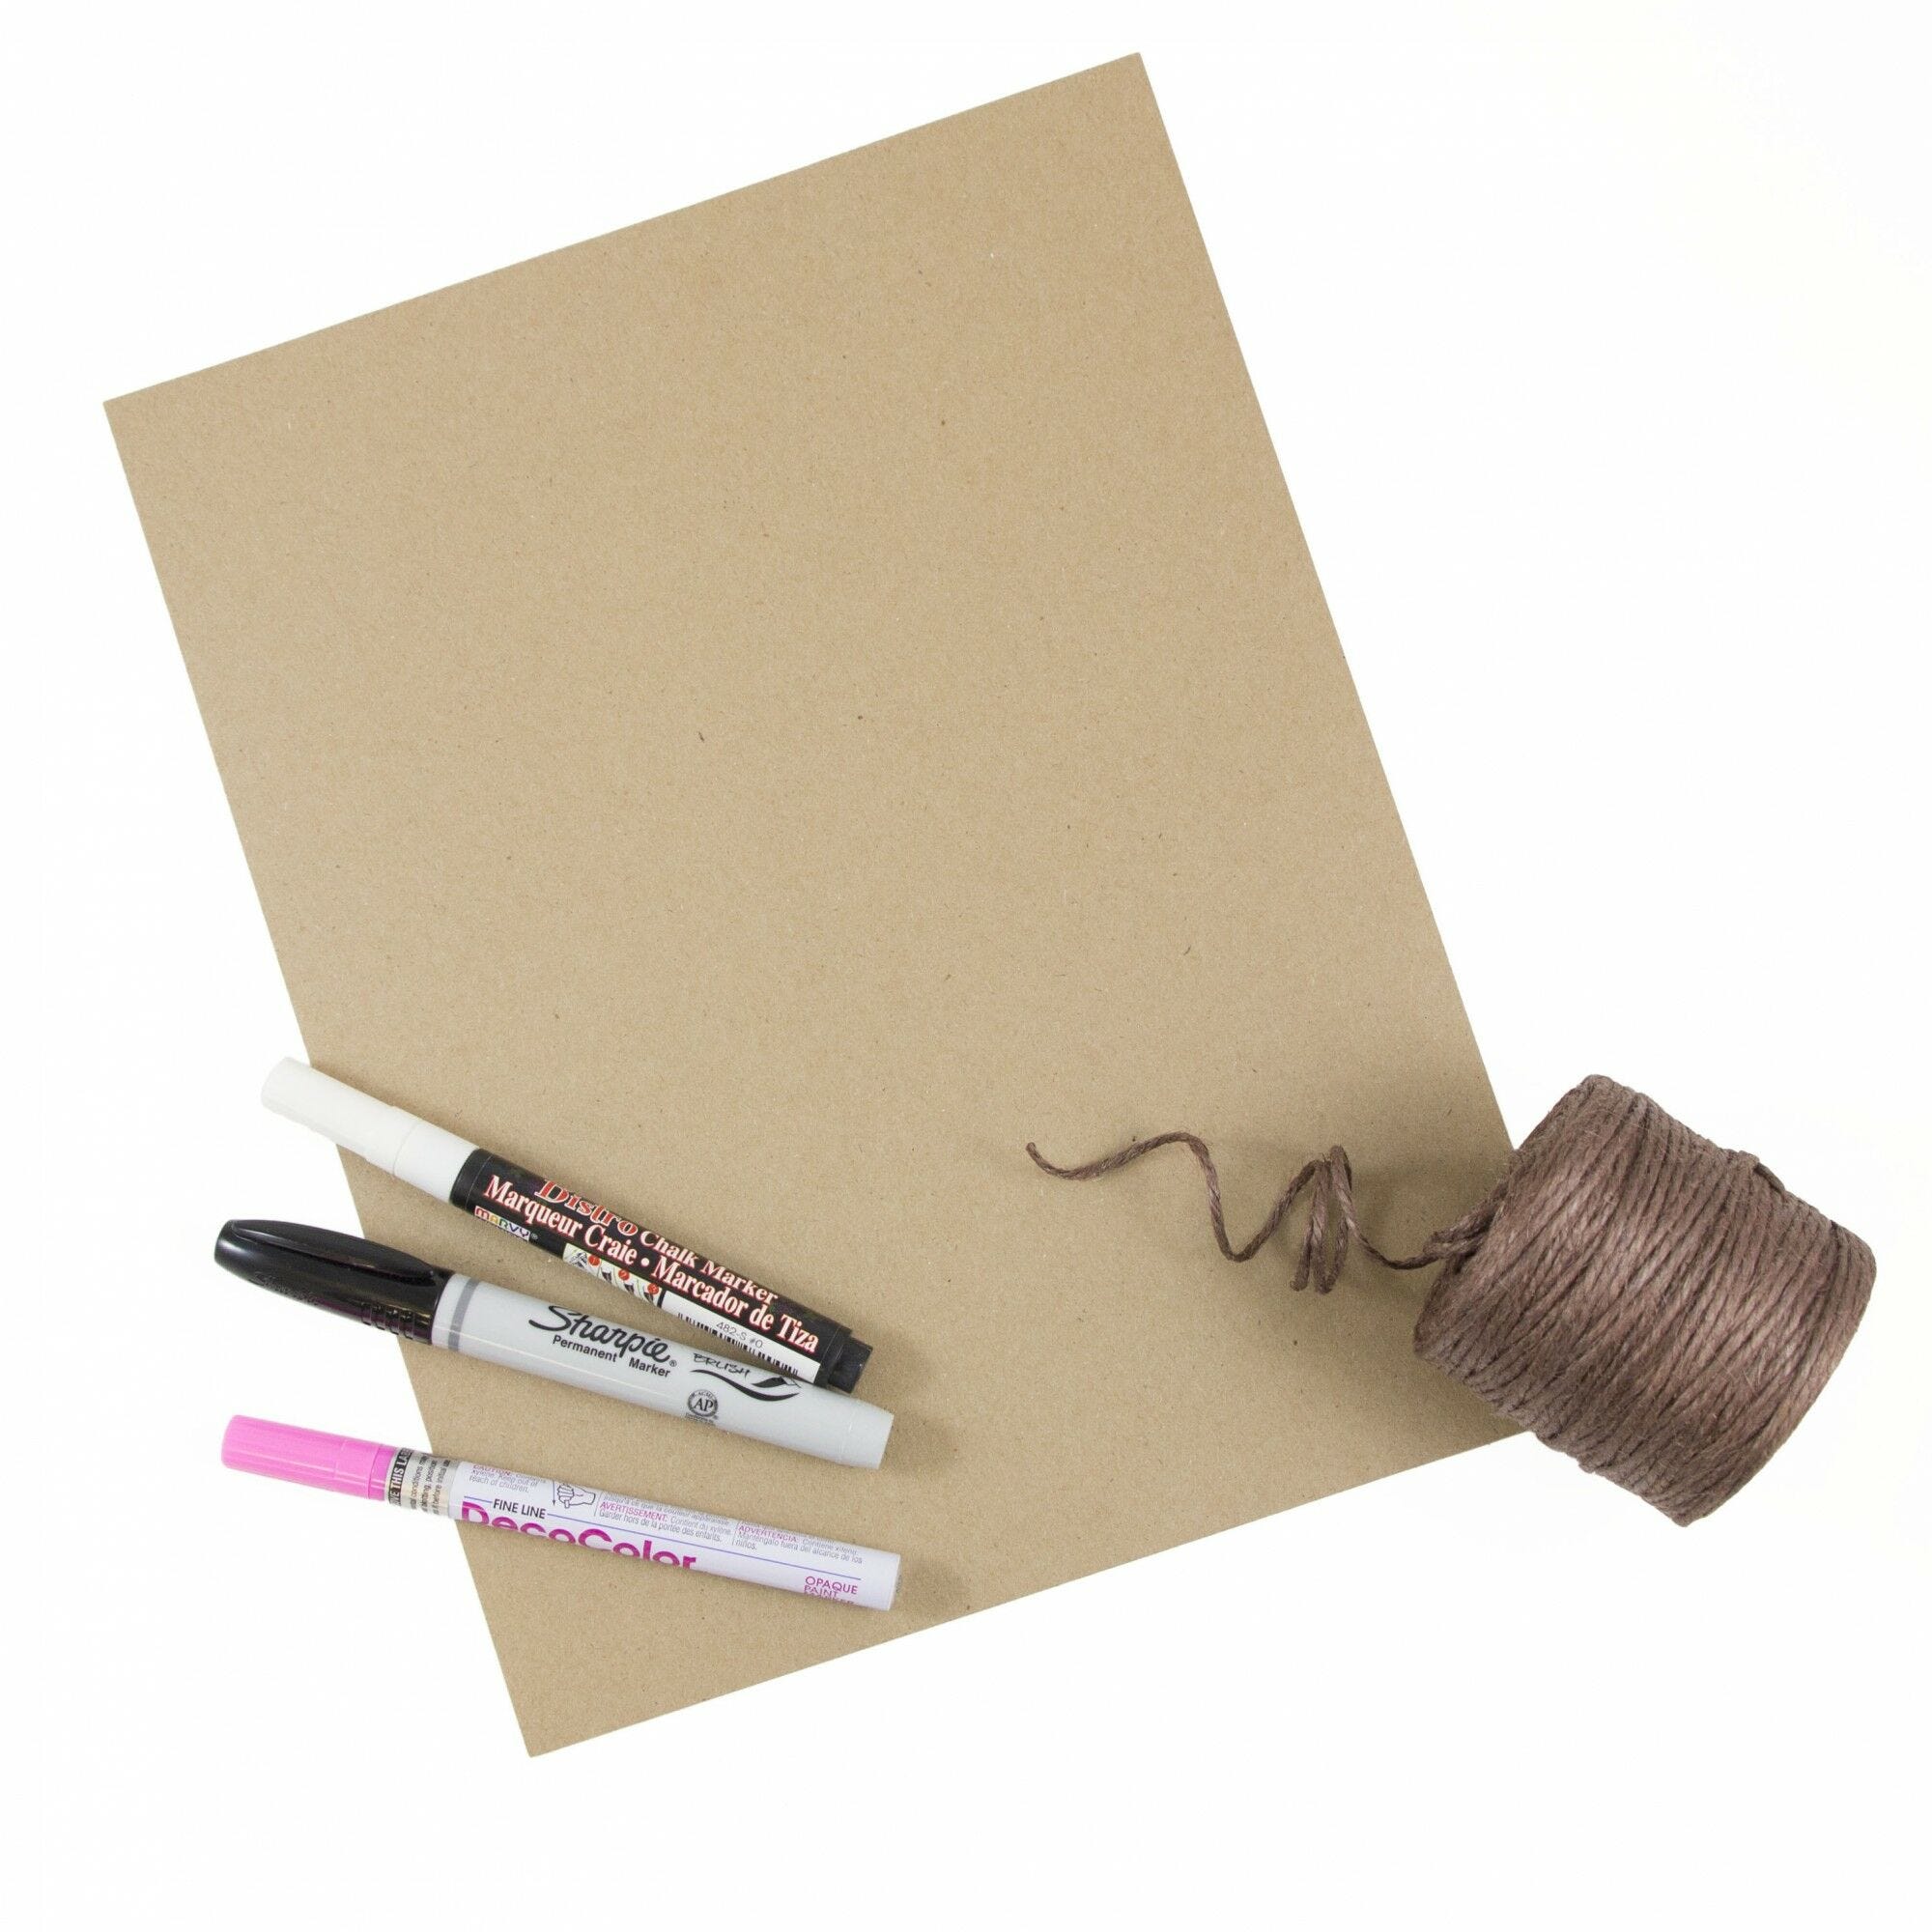 Materials for Last Minute DIY Halloween Costumes: brown kraft paper, twine, sharpie, and paint markers